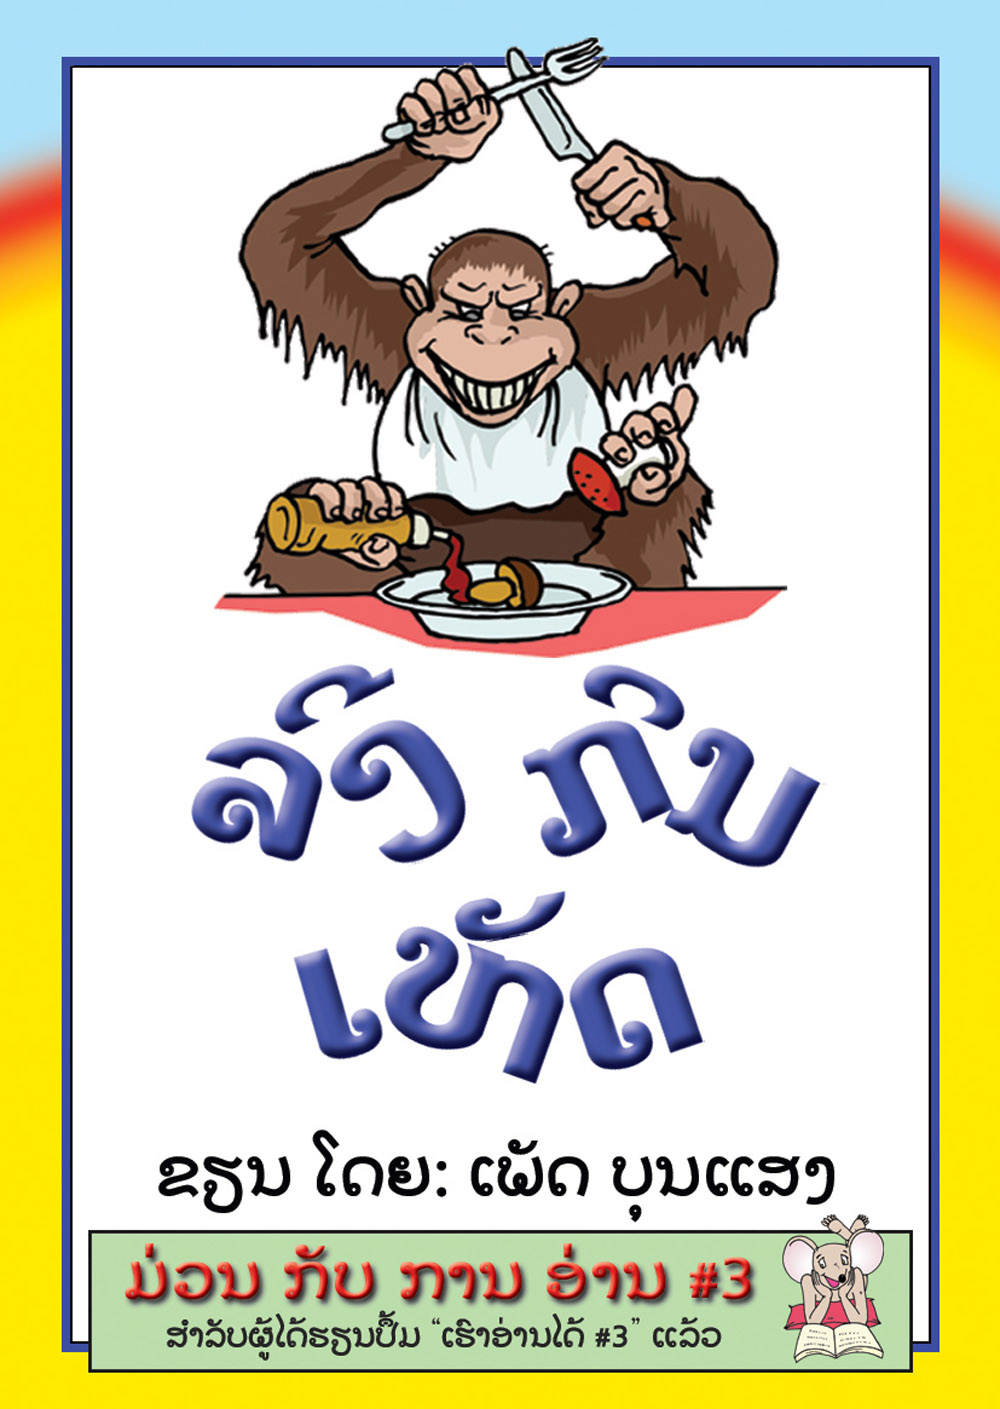 The Monkey Eats Mushrooms large book cover, published in Lao language